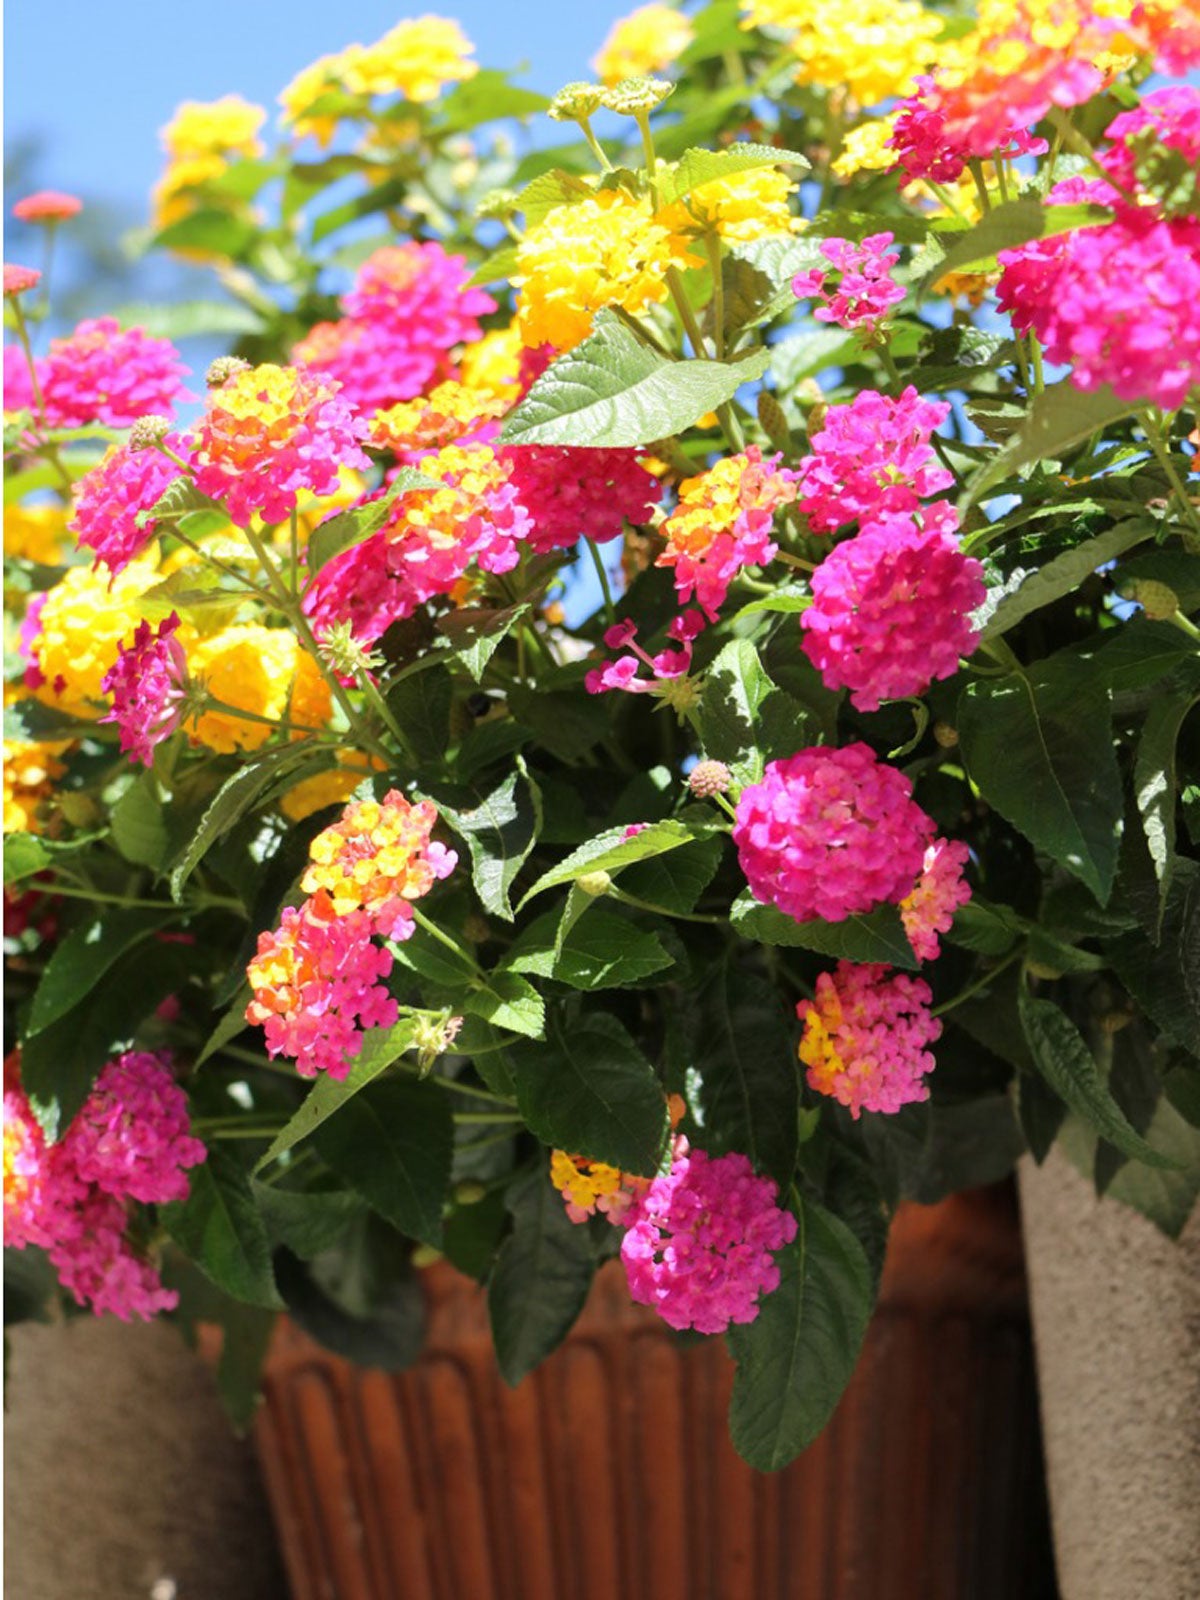 Growing Lantana In Containers   Tips On Caring For Lantana In Pots